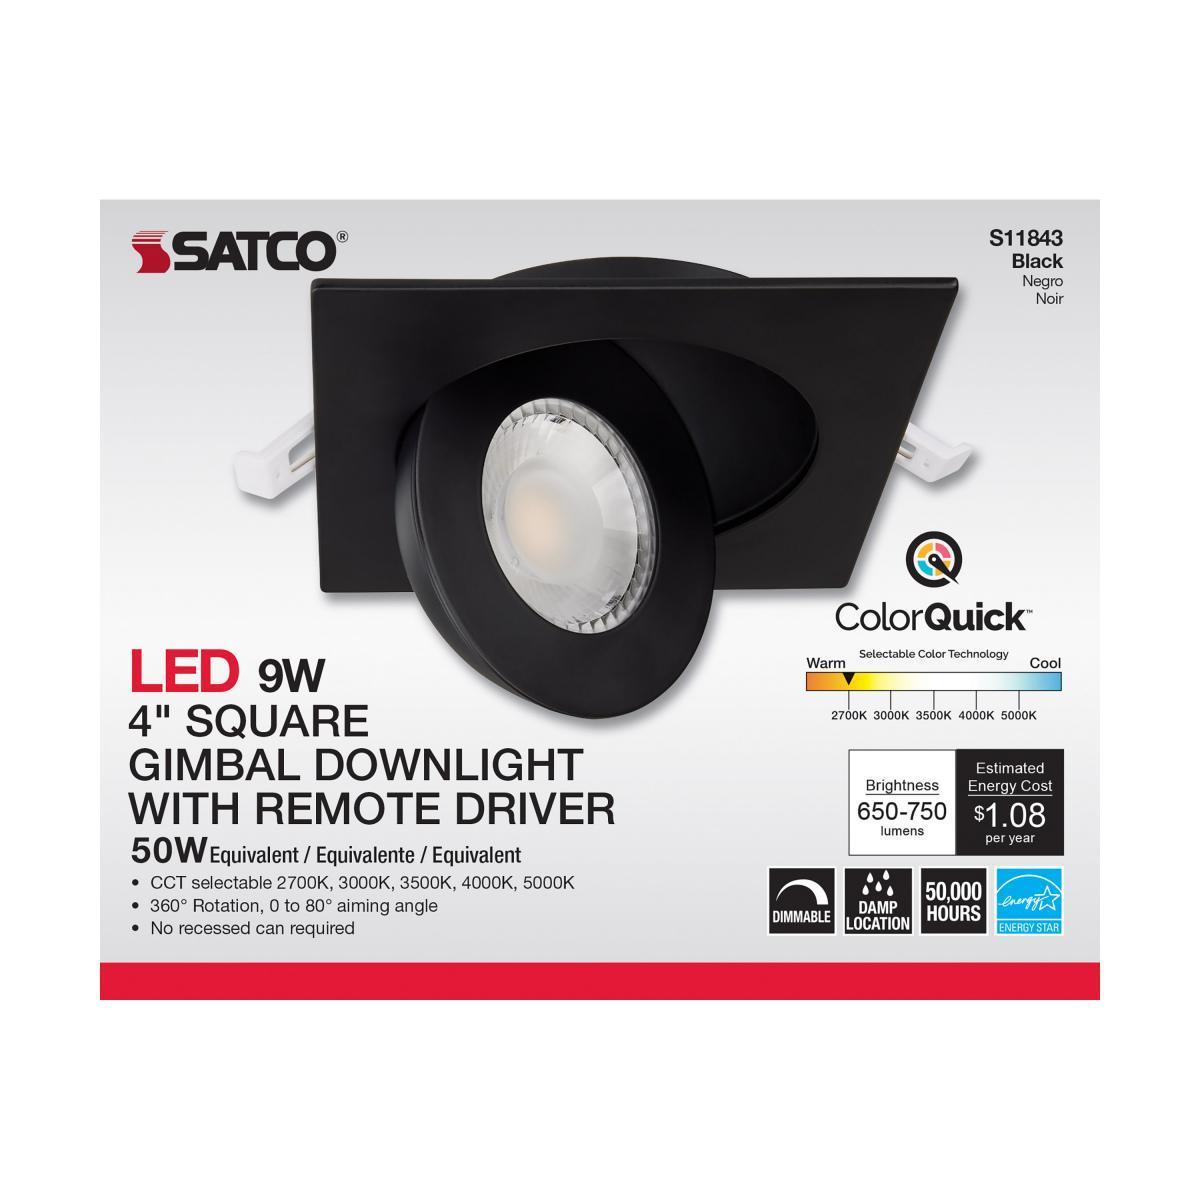 4 Inch Square Gimbal Downlight with Remote Driver, Square, 9 Watt, 750 Lumens, Selectable CCT, 2700K to 5000K, Remote Driver, Black Finish - Bees Lighting